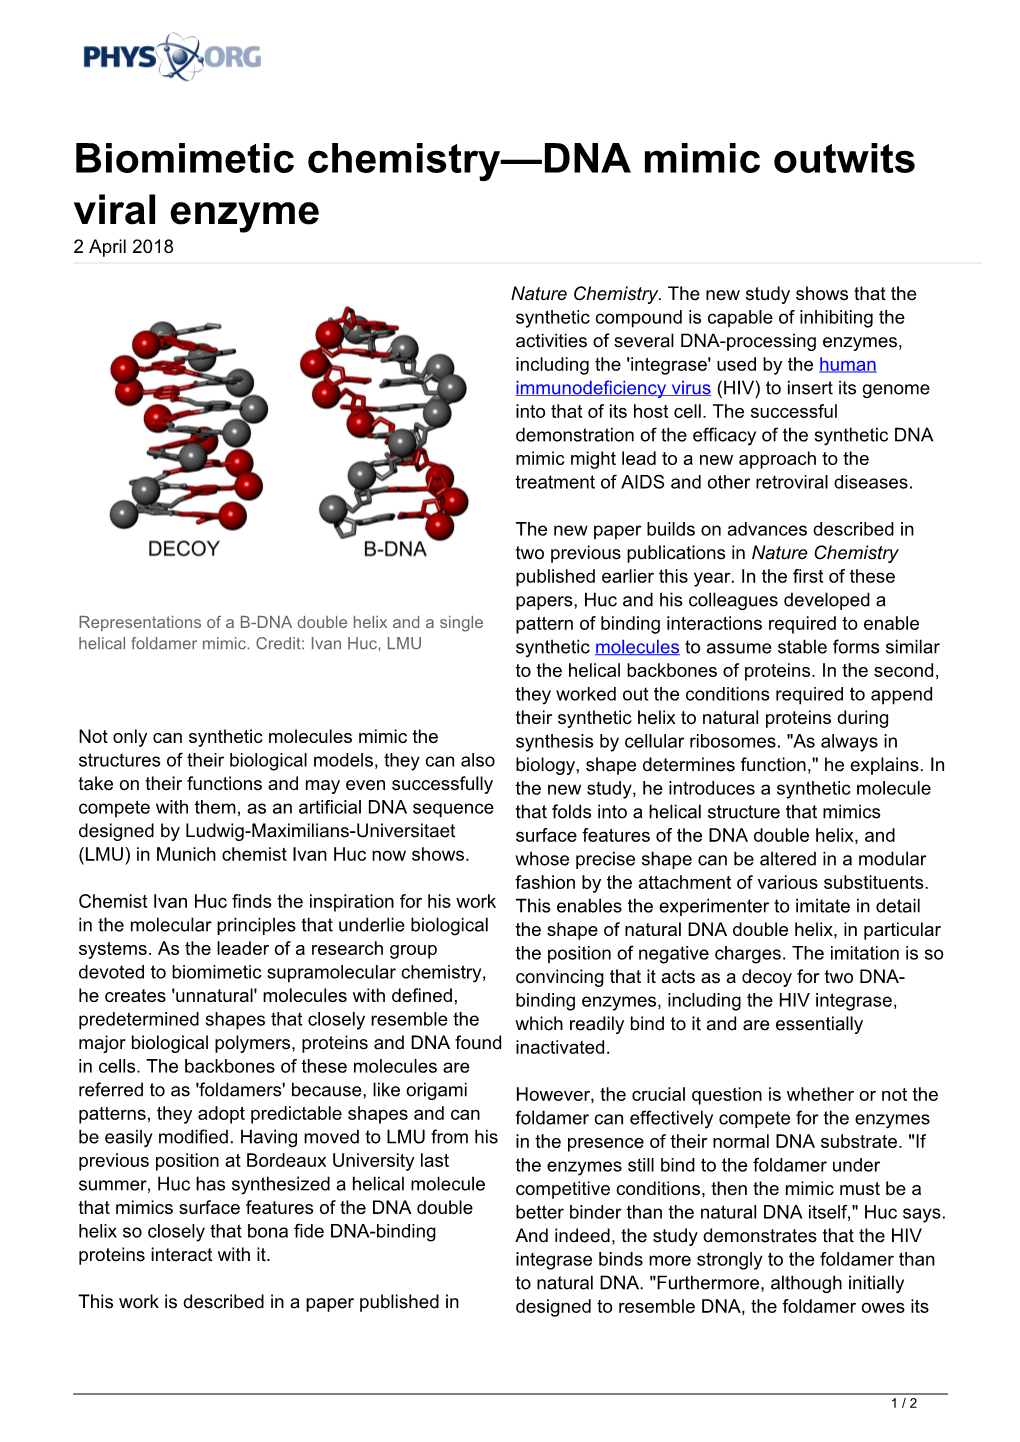 Biomimetic Chemistry—DNA Mimic Outwits Viral Enzyme 2 April 2018